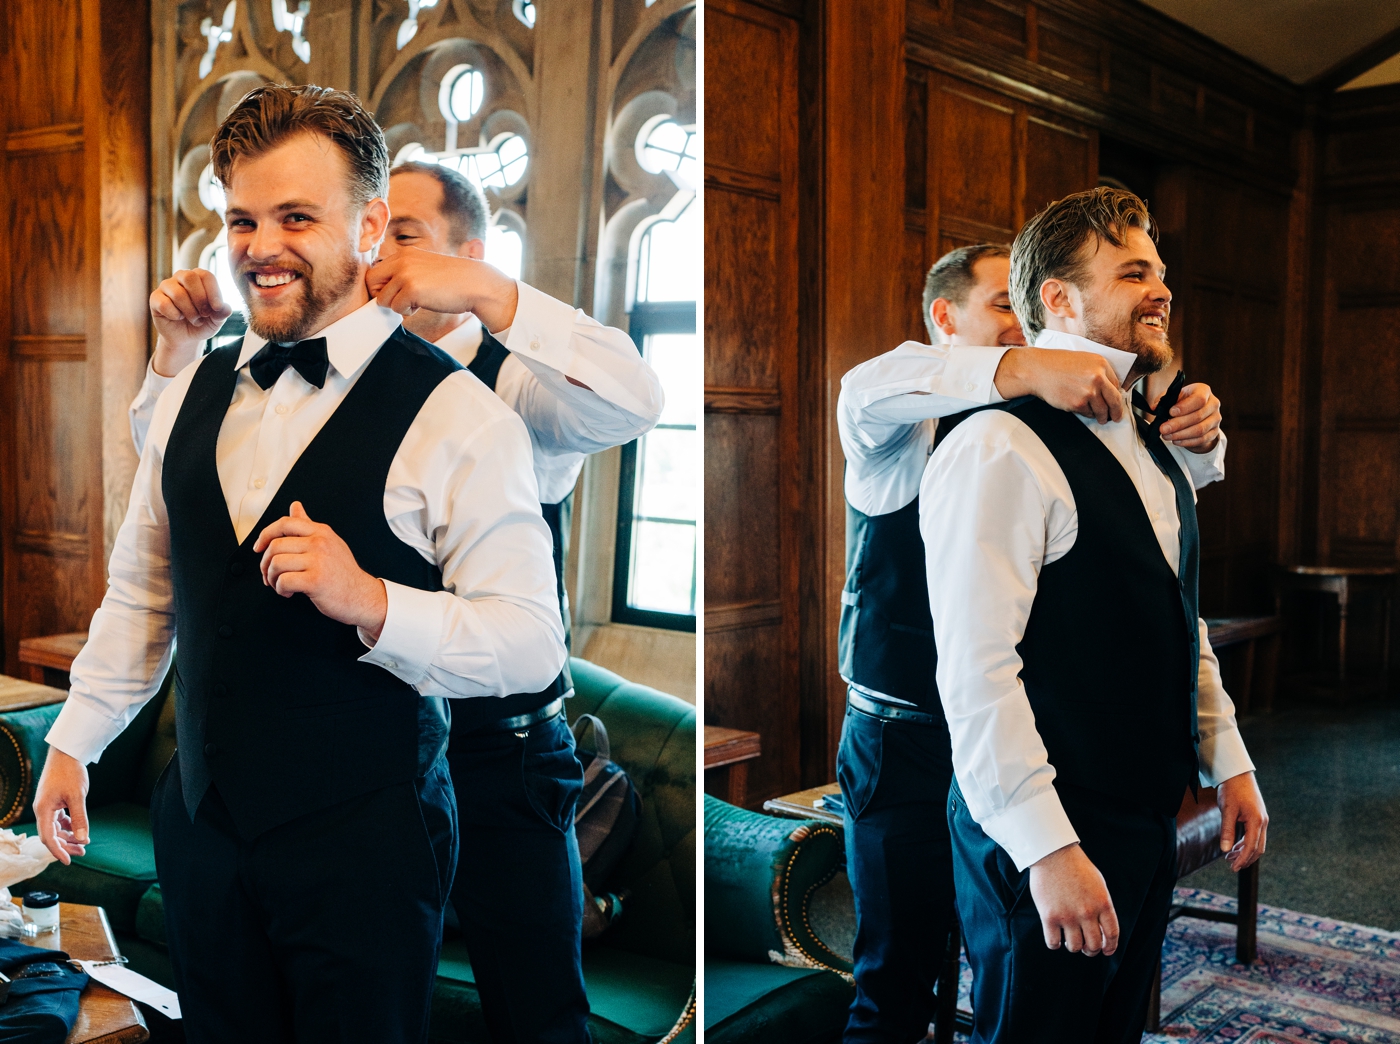 Groom getting ready portraits by Mika LH Photography